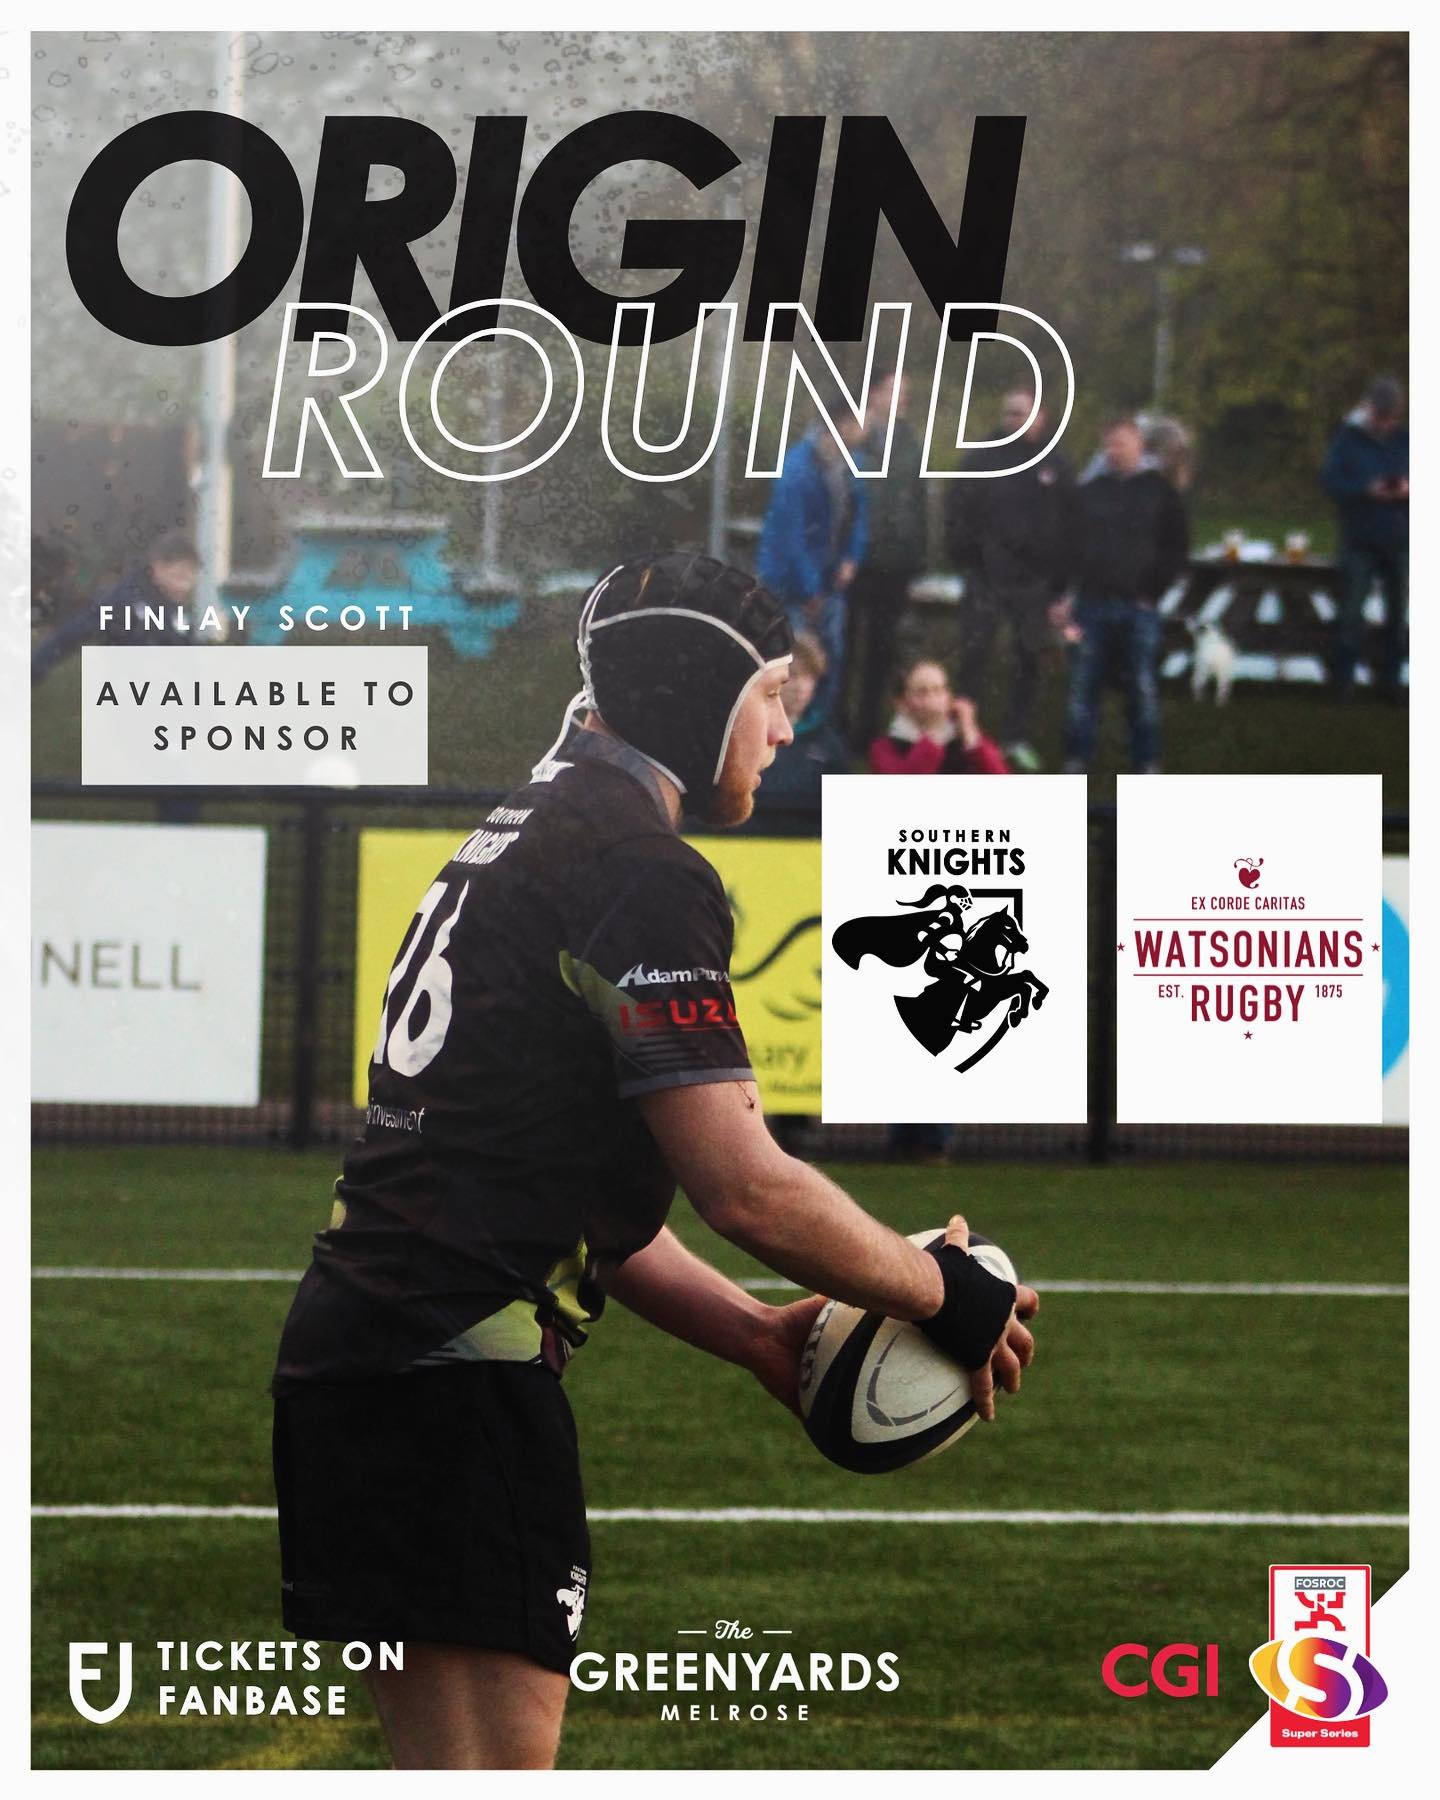 𝙊𝙧𝙞𝙜𝙞𝙣 𝙍𝙤𝙪𝙣𝙙 🔜

Another home game this week, as we welcome Watsonians for our club of origin round! 

🗓️ Saturday 4th May
📍The Greenyards
⏰ 5pm kick-off, following the conclusion of @melroserugby&rsquo;s Crichton Cup

GET YOUR TICKETS T